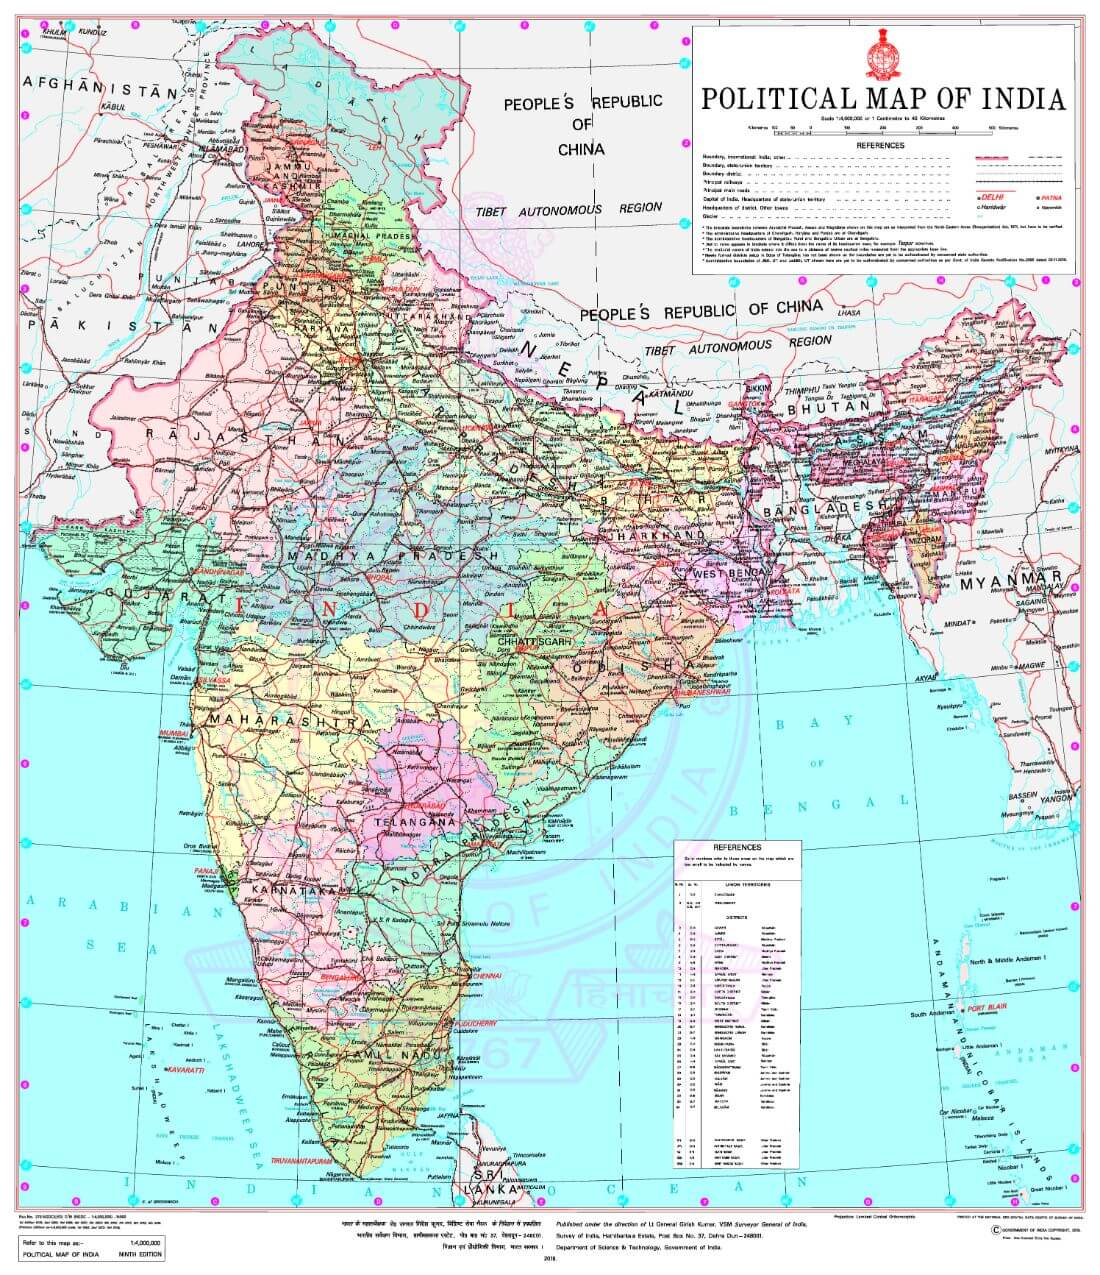 Political Map Of India - Framed Prints by Tallenge | Buy Posters ...